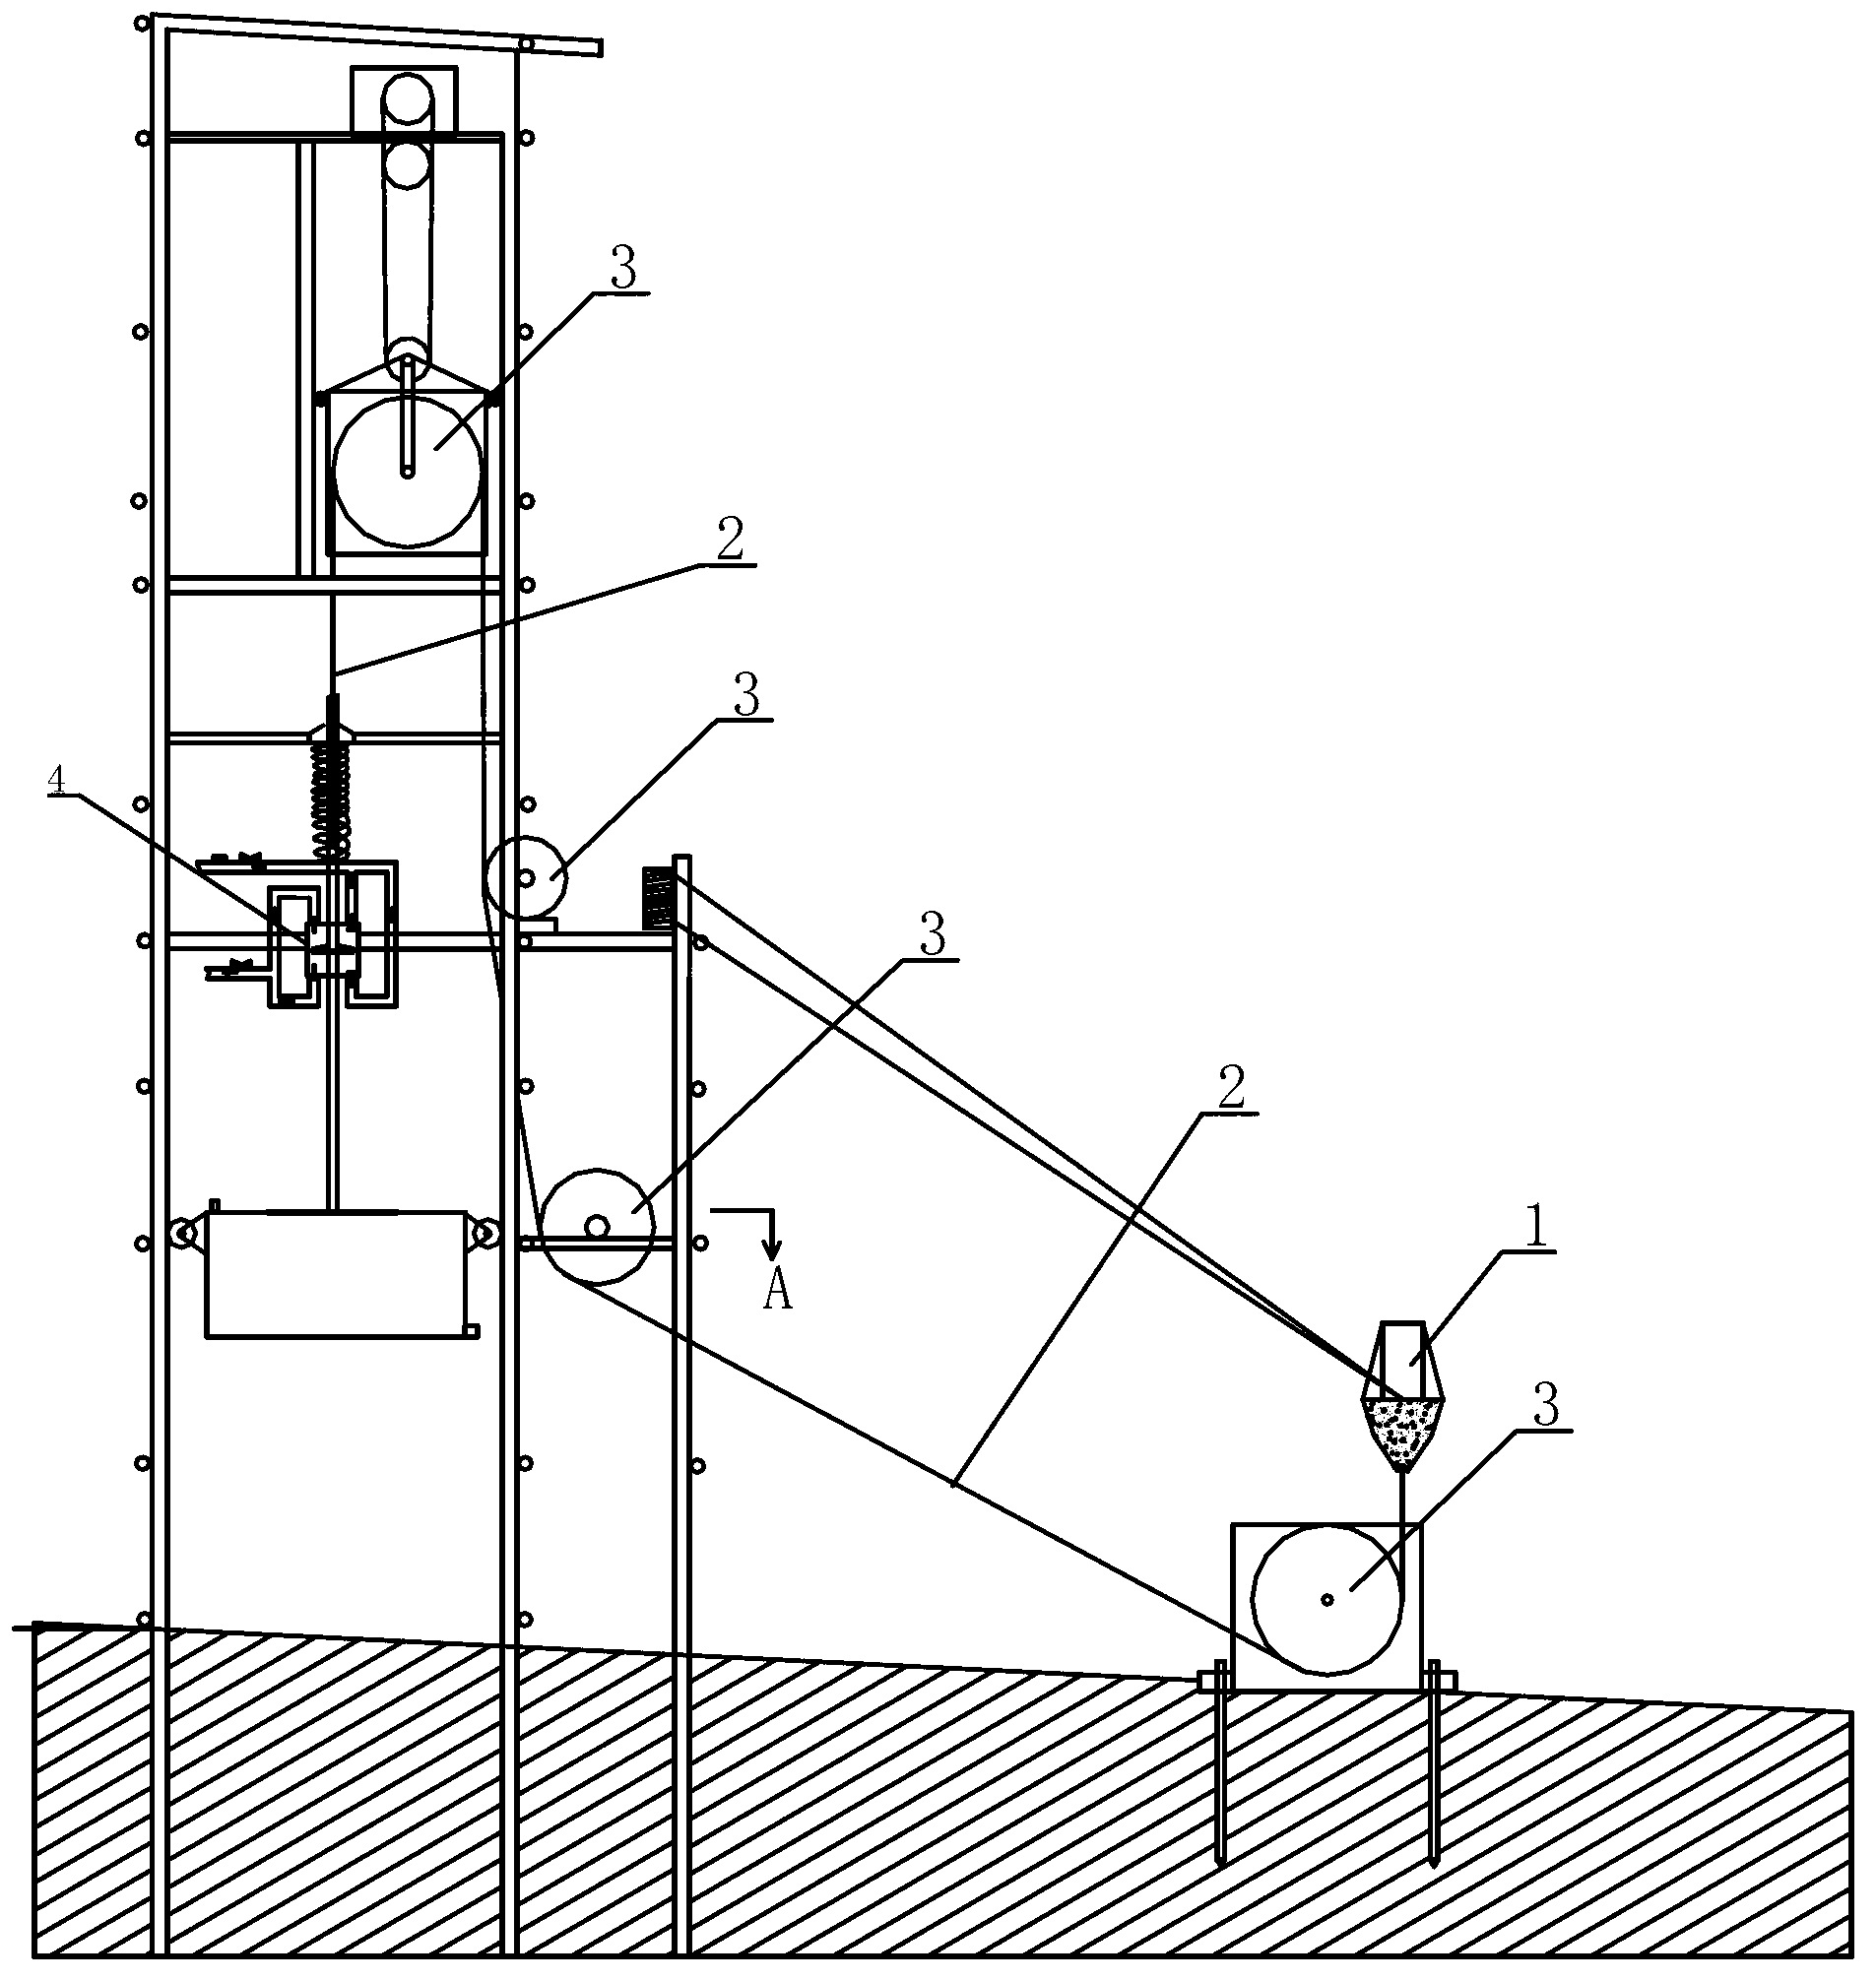 Stable wave power generation system